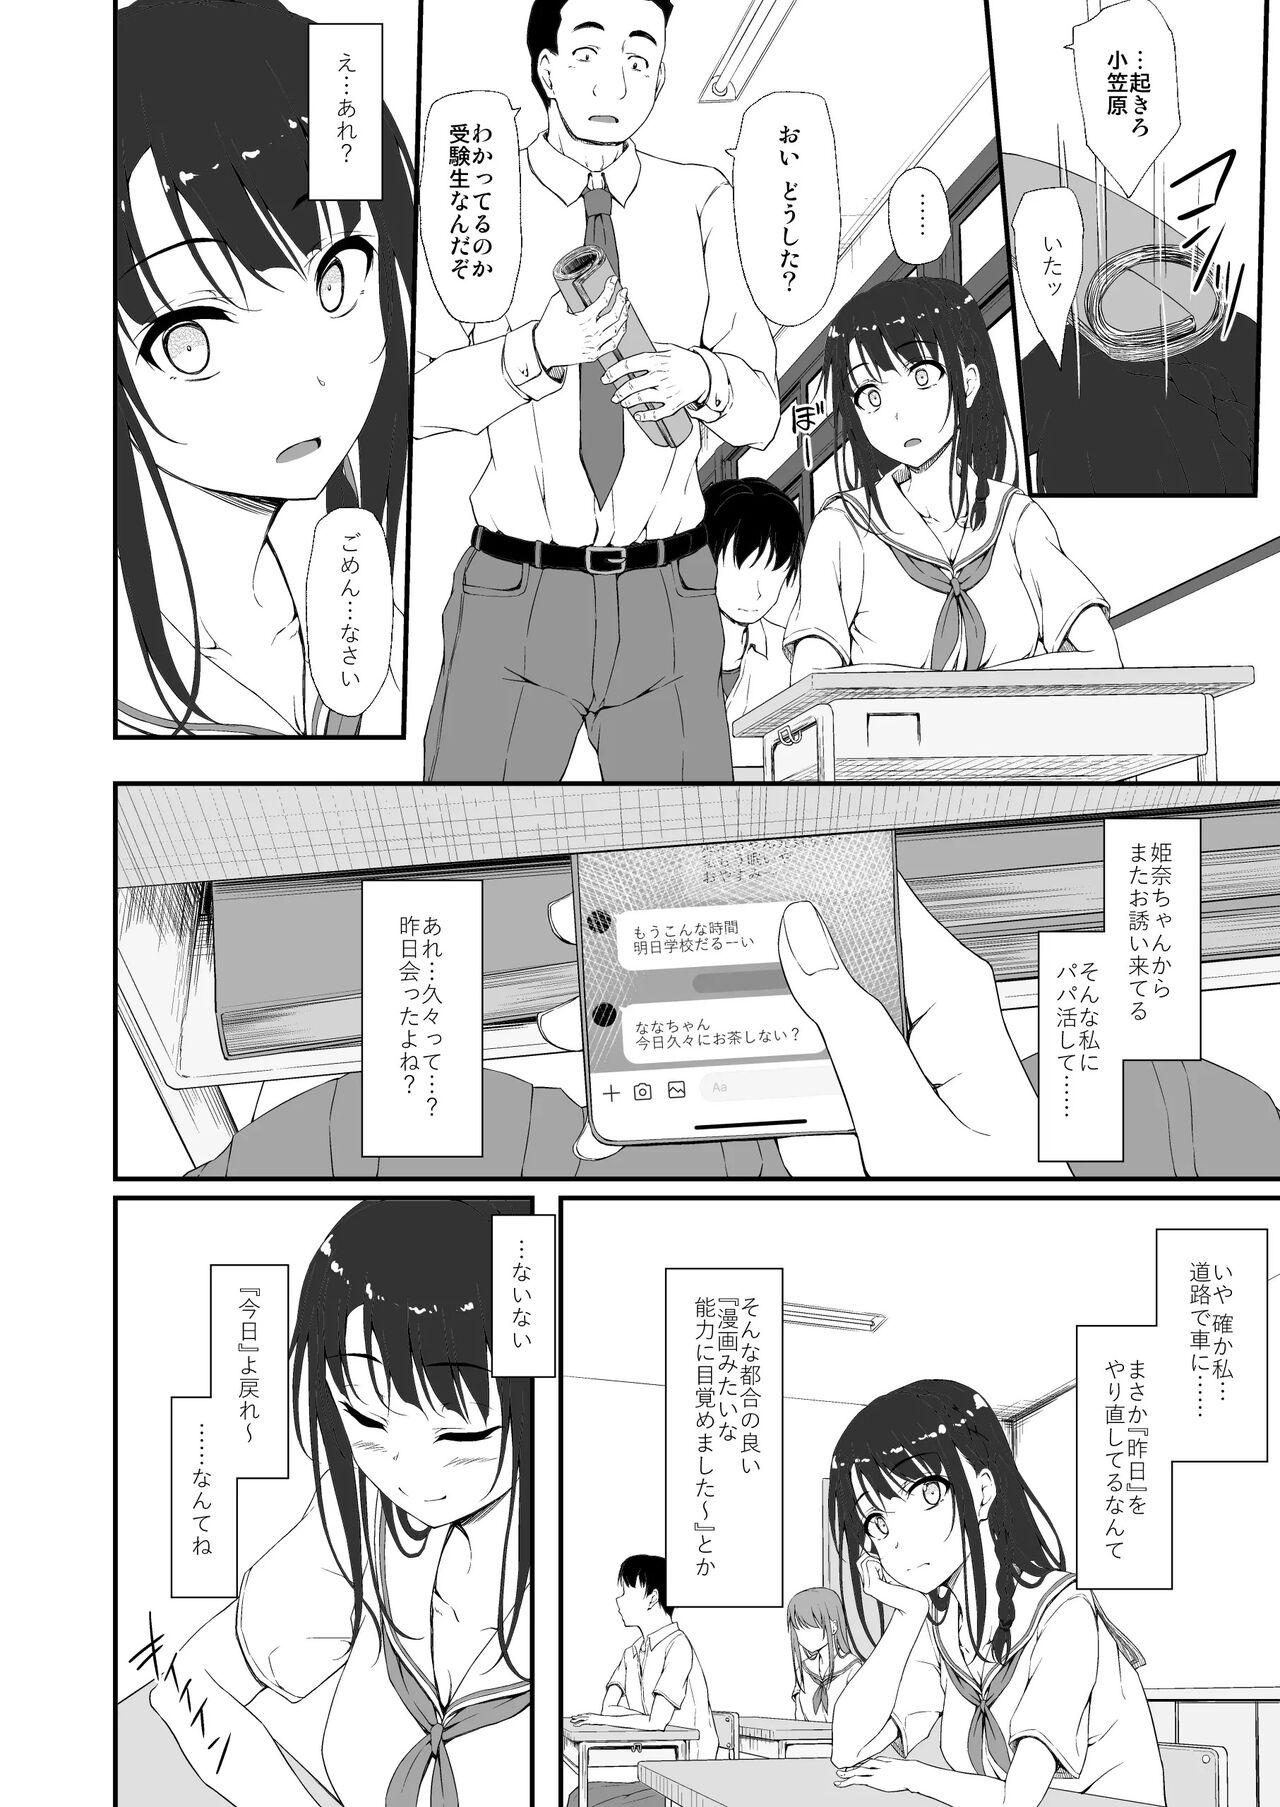 Leaked Re:Temptation 0 - Original Missionary - Page 9